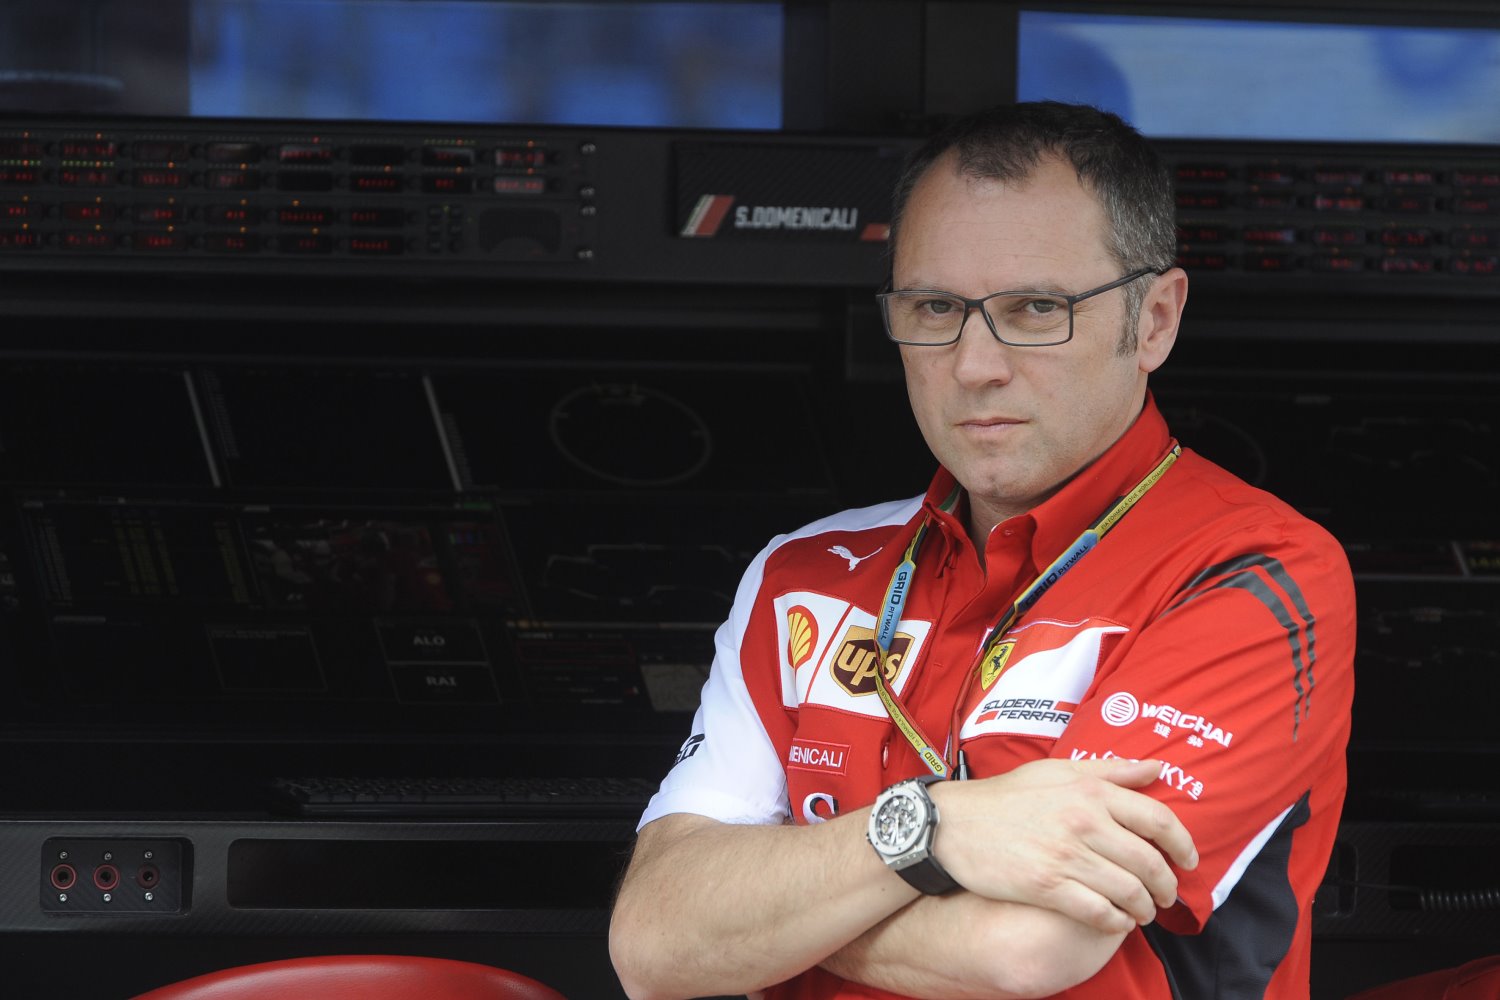 Stefano Domenicali must be smoking some sort of funny weed